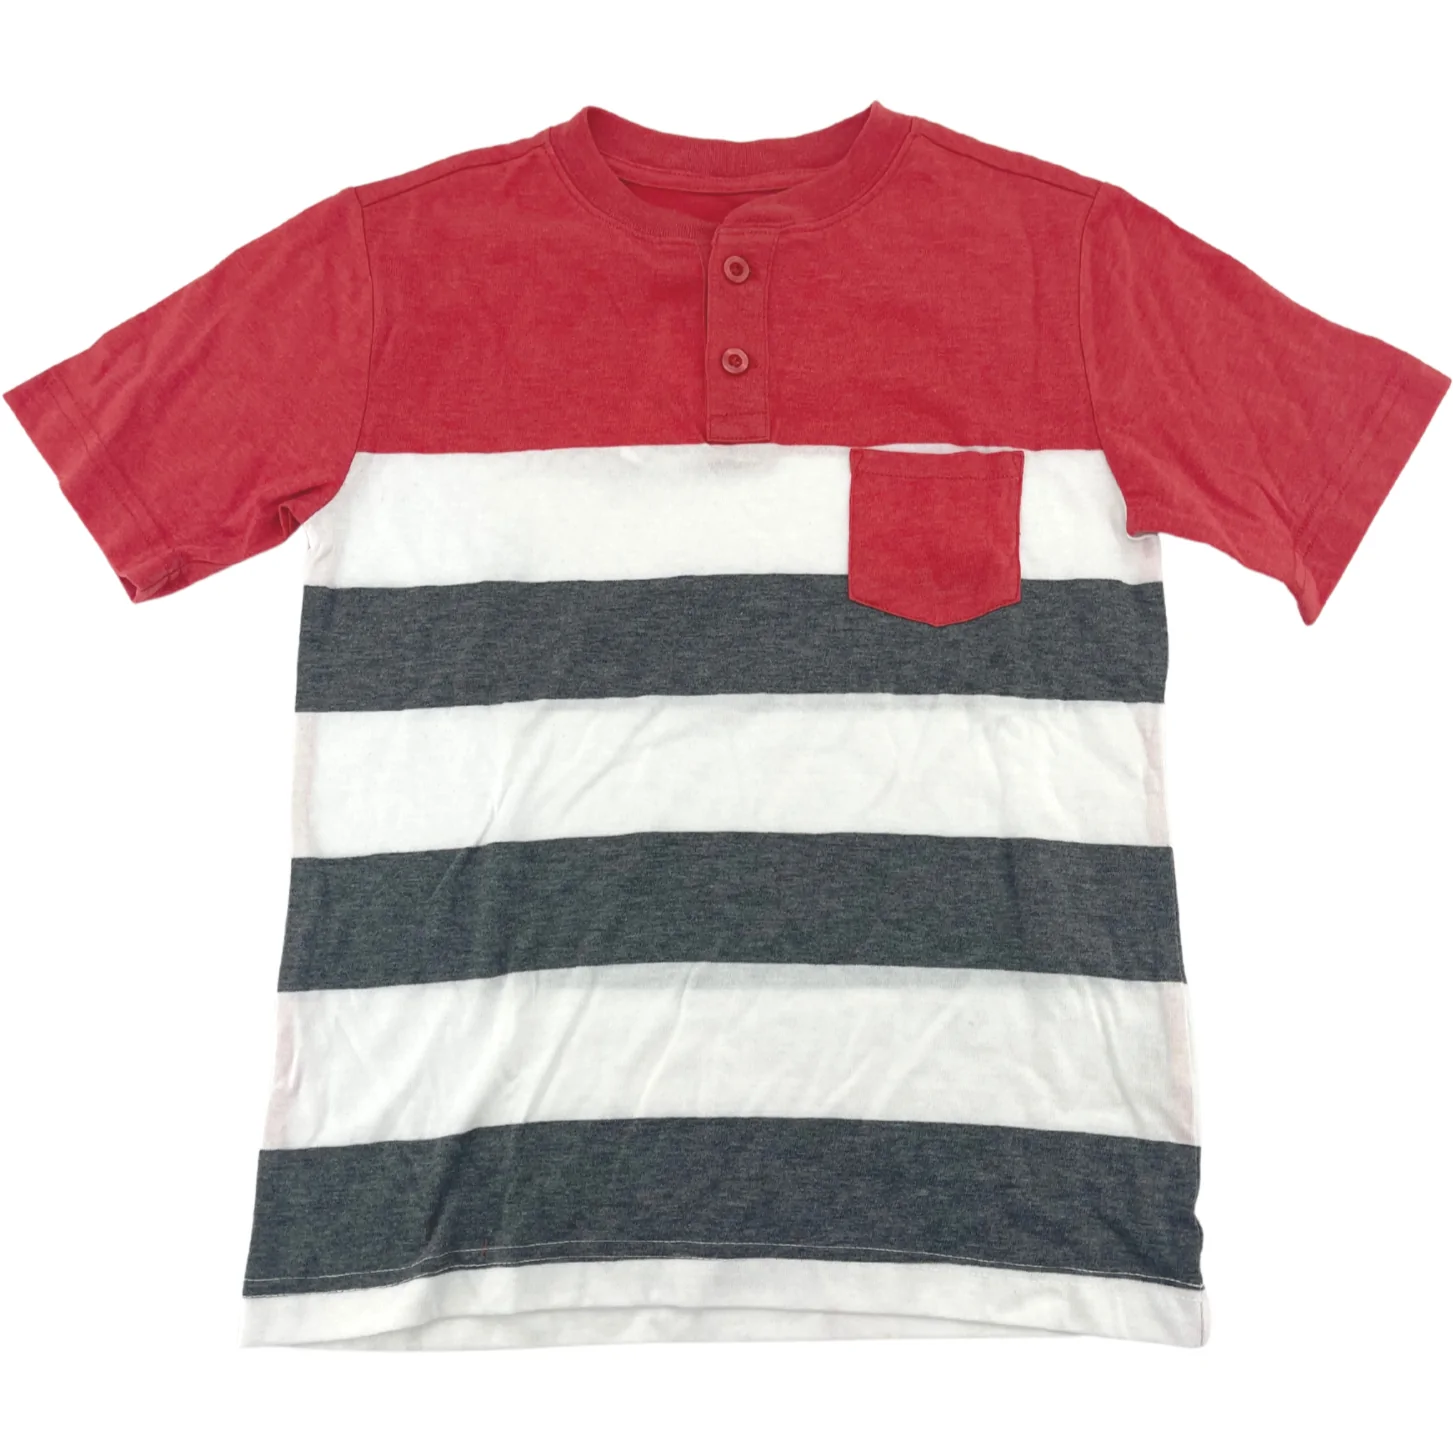 Roebuck & Co Boy's T-Shirt / Stripes / Red, White, Grey / Size Small